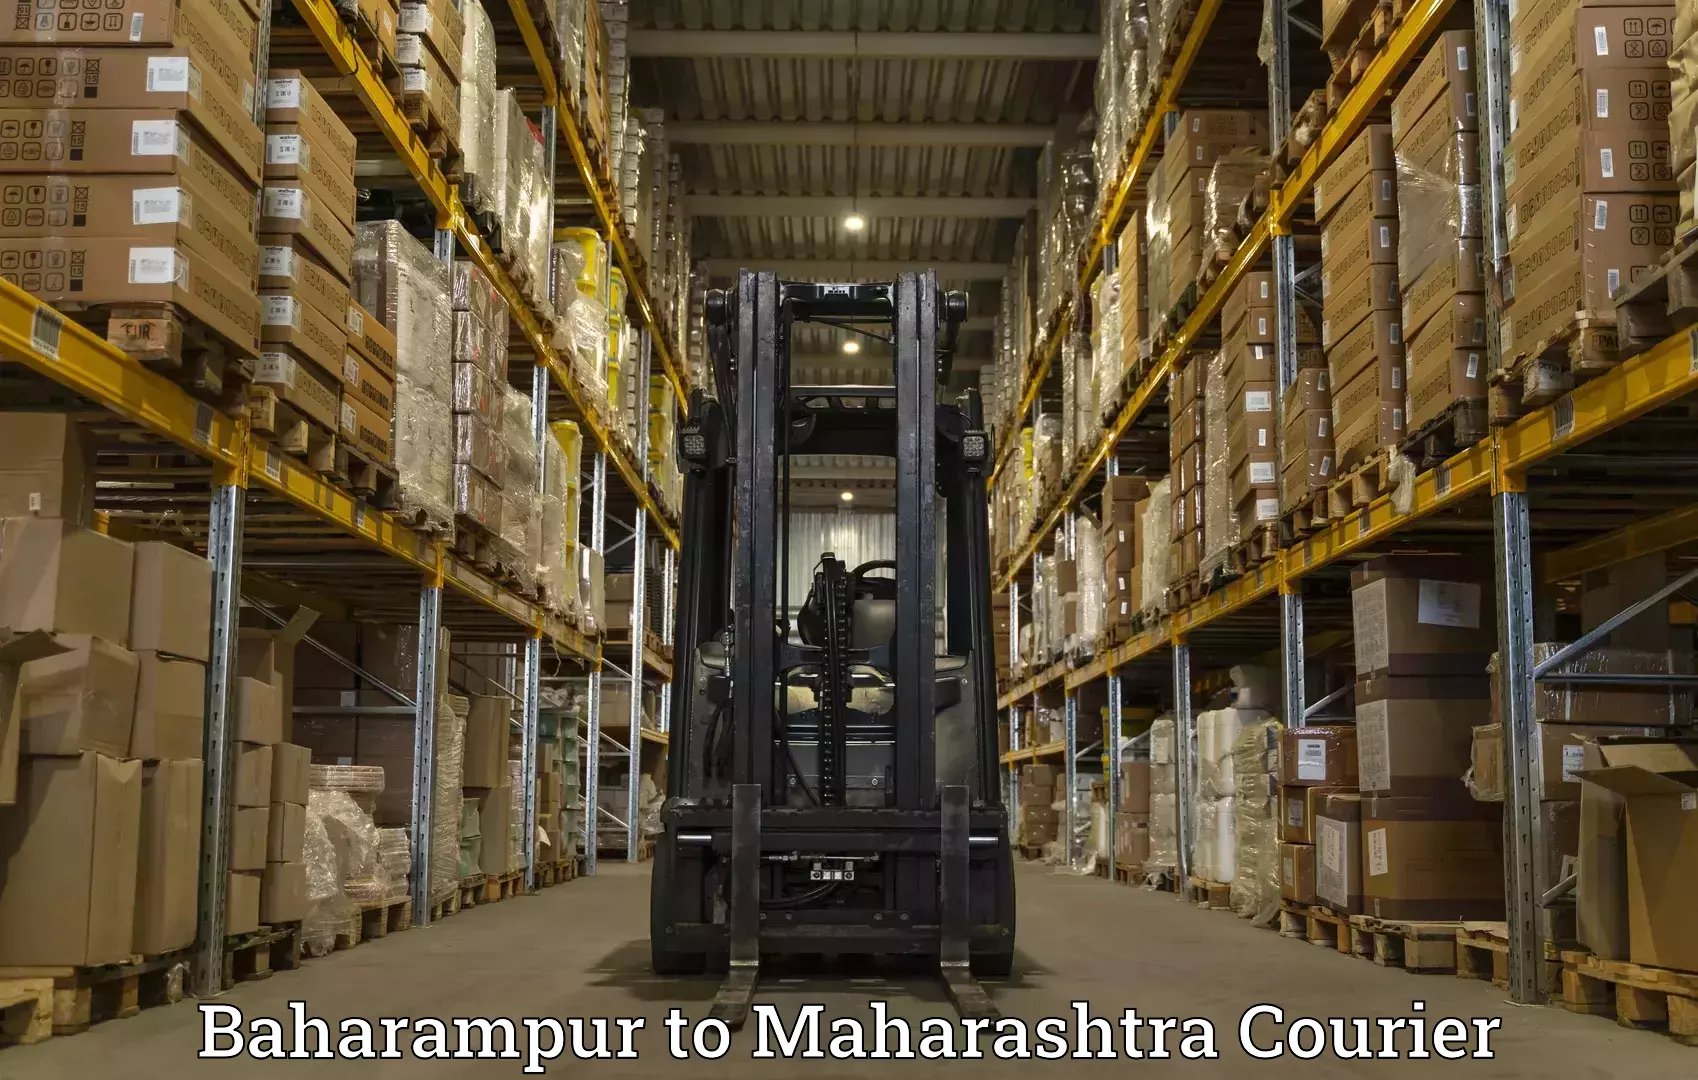 Multi-national courier services Baharampur to Maharashtra